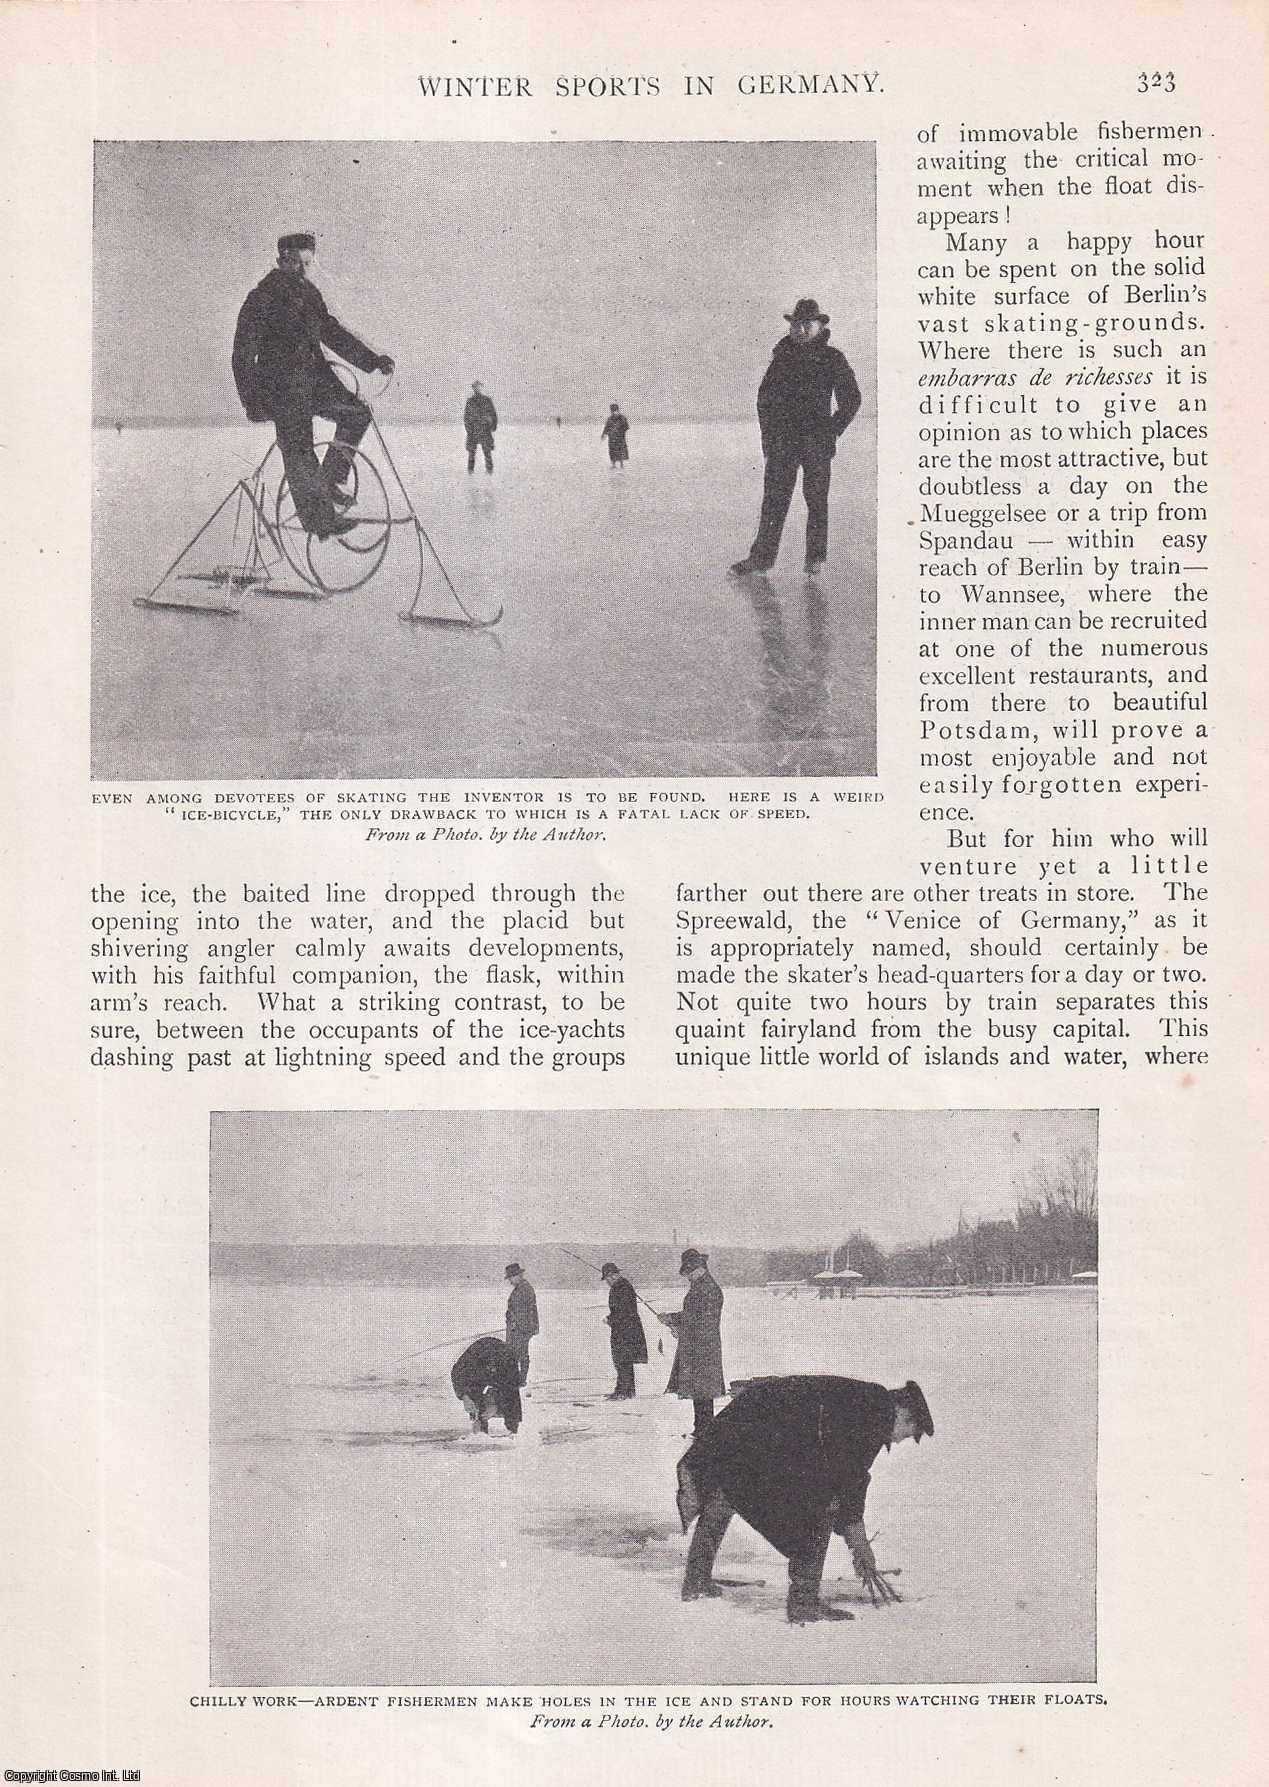 GERMAN WINTER SPORTS - Winter Sports in Germany : Ice-Yachting ; Tobogganing ; Sail-Skating & more. By A. Pitcairn-Knowles. An uncommon original article from the Wide World Magazine, 1906.